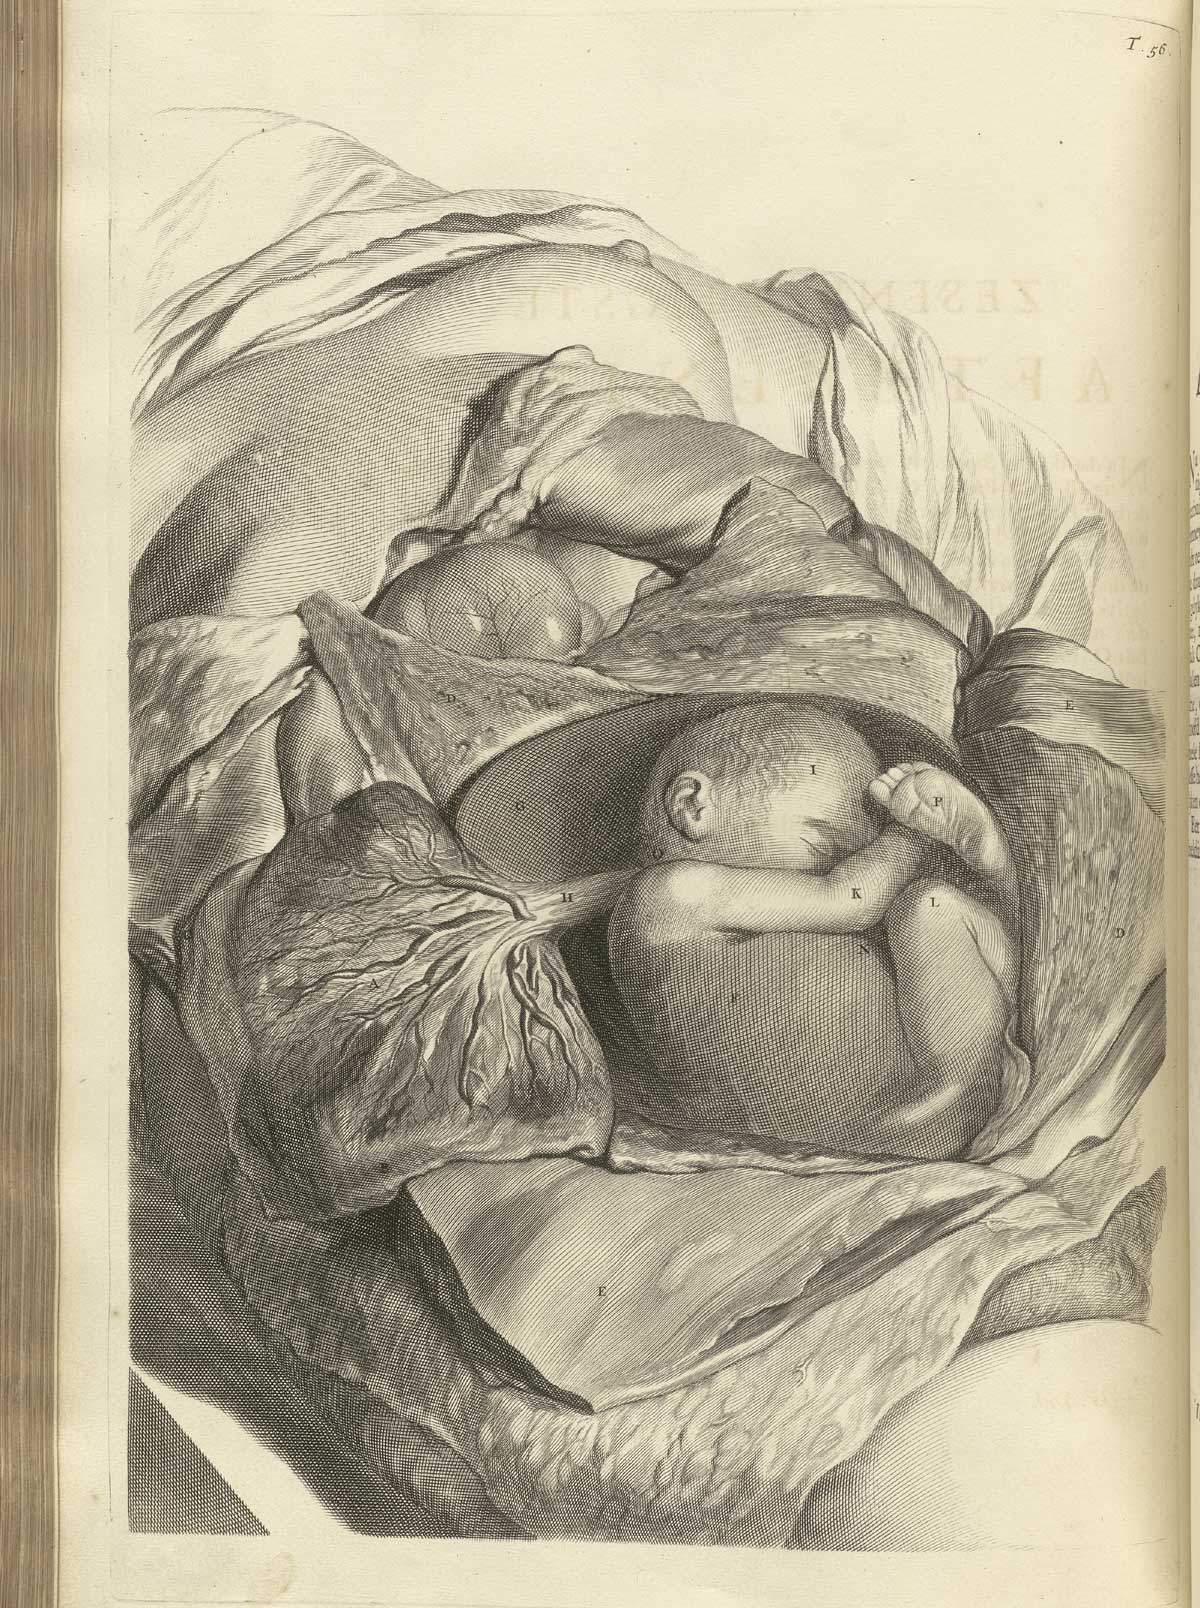 Engraving of a pregnant woman’s abdomen opened showing a well-developed fetus in utero with its amniotic sac and umbilical cord lying to the left; a sheet is draped around the edges of the open cavity; from Govard Bidloo’s Ontleding Des Menschelyken Lichaams, Amsterdam, 1690, NLM Call no. WZ 250 B5855anDu 1690.